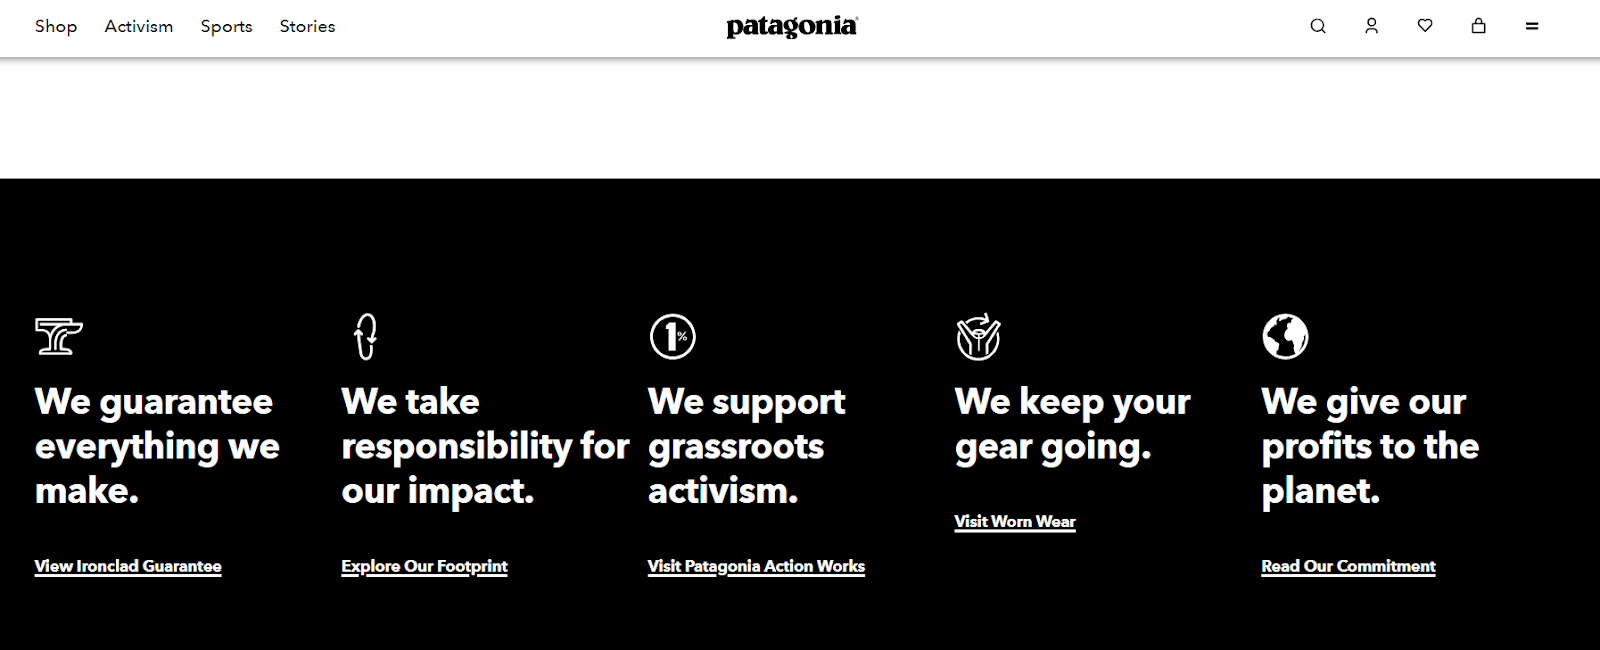 Patagonia's website links to their commitment statements.